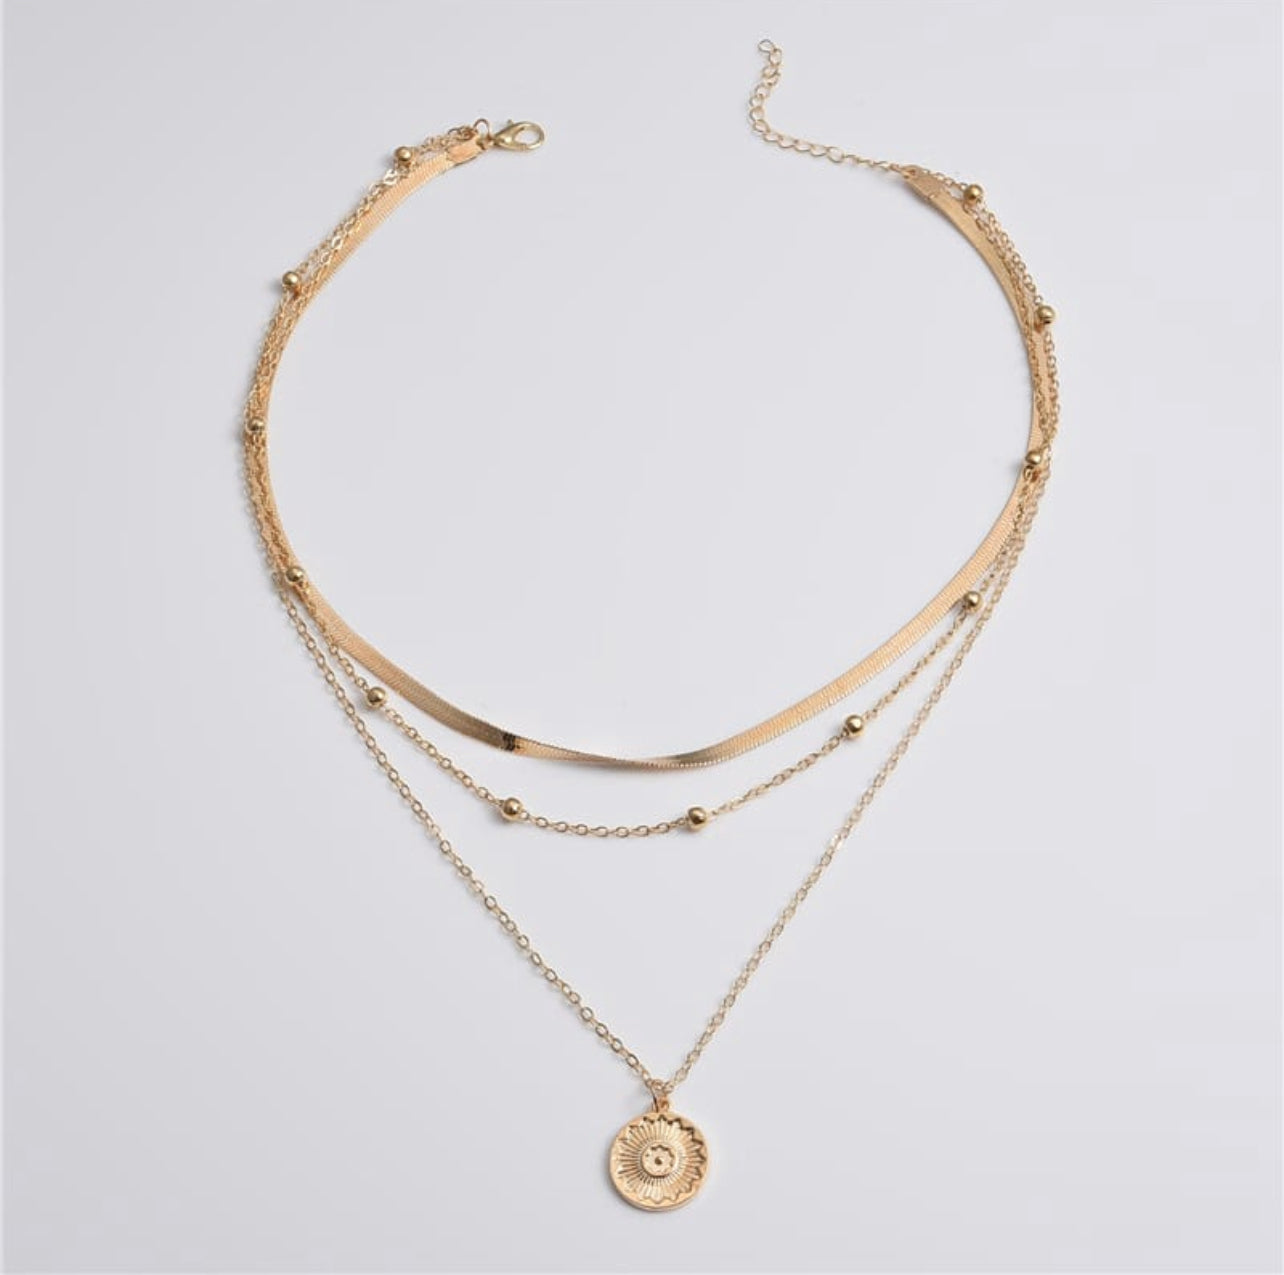 Lay coin necklace